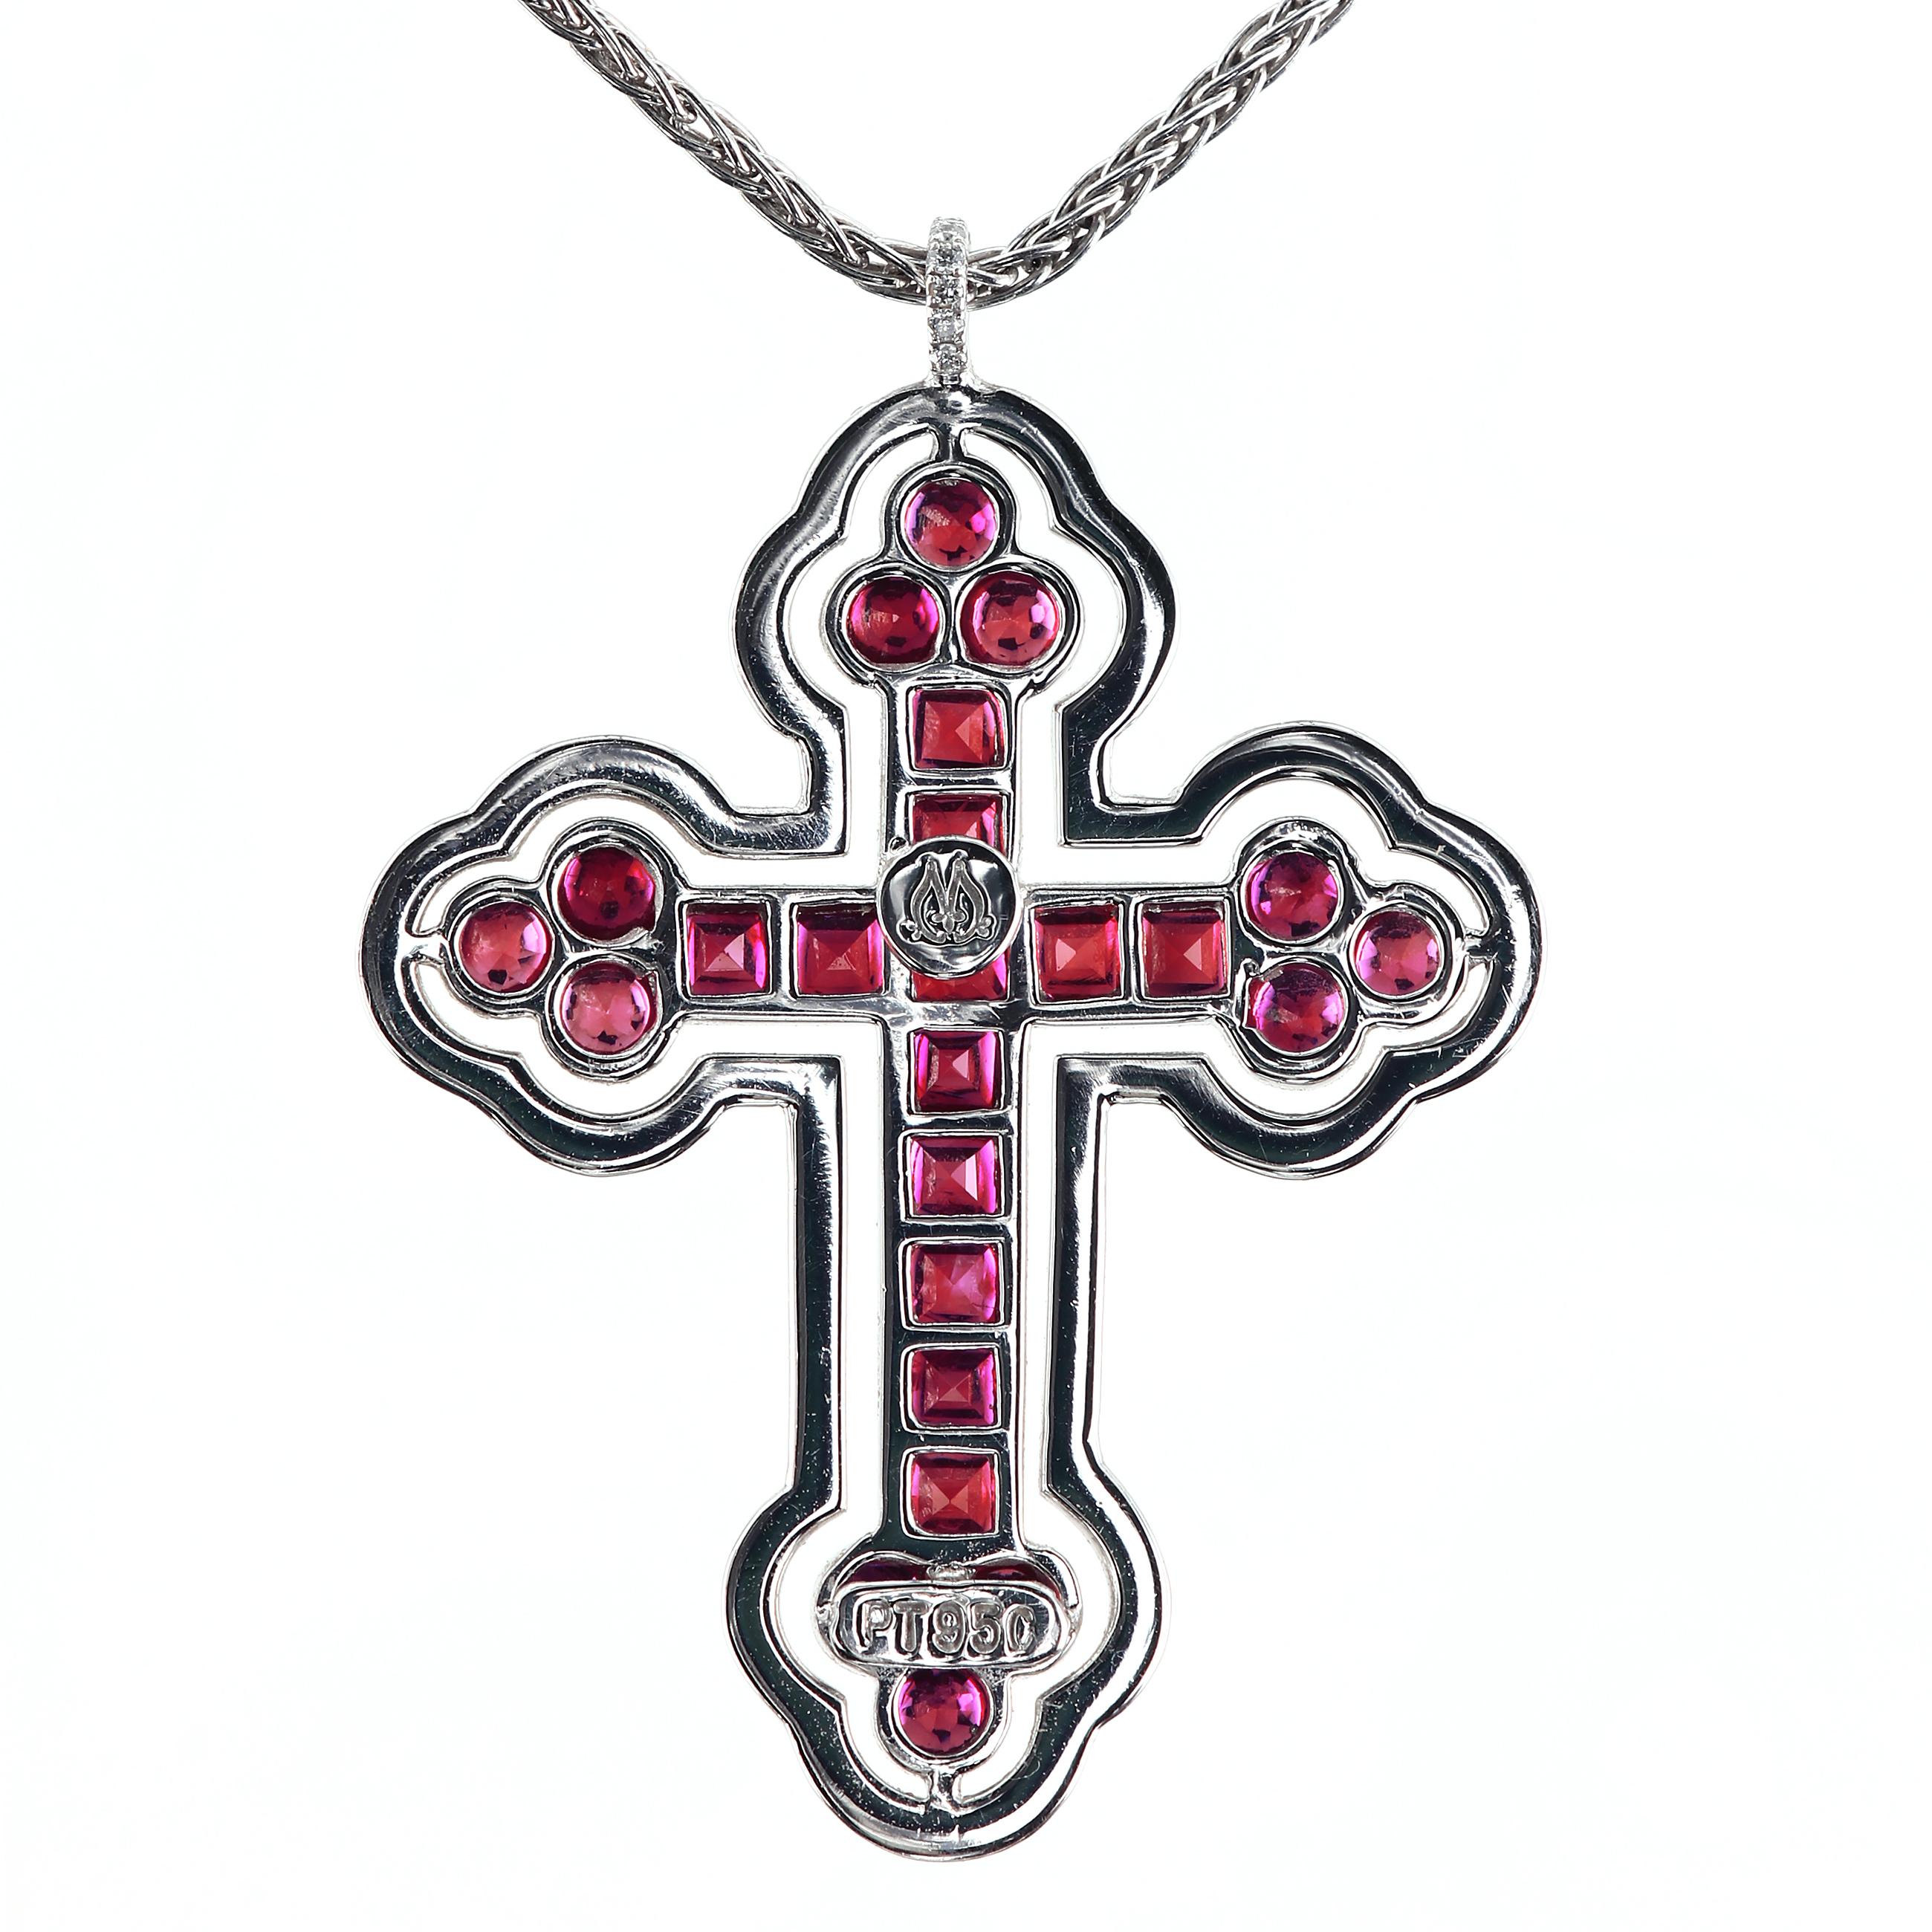 Channel-set buffed top rubies and white diamonds adorn the bespoke Greek Orthodox Cross. 
24 square and round buffed-top natural rubies total of 1.25 carat
98 full-cut diamonds 0.70 ctw
18